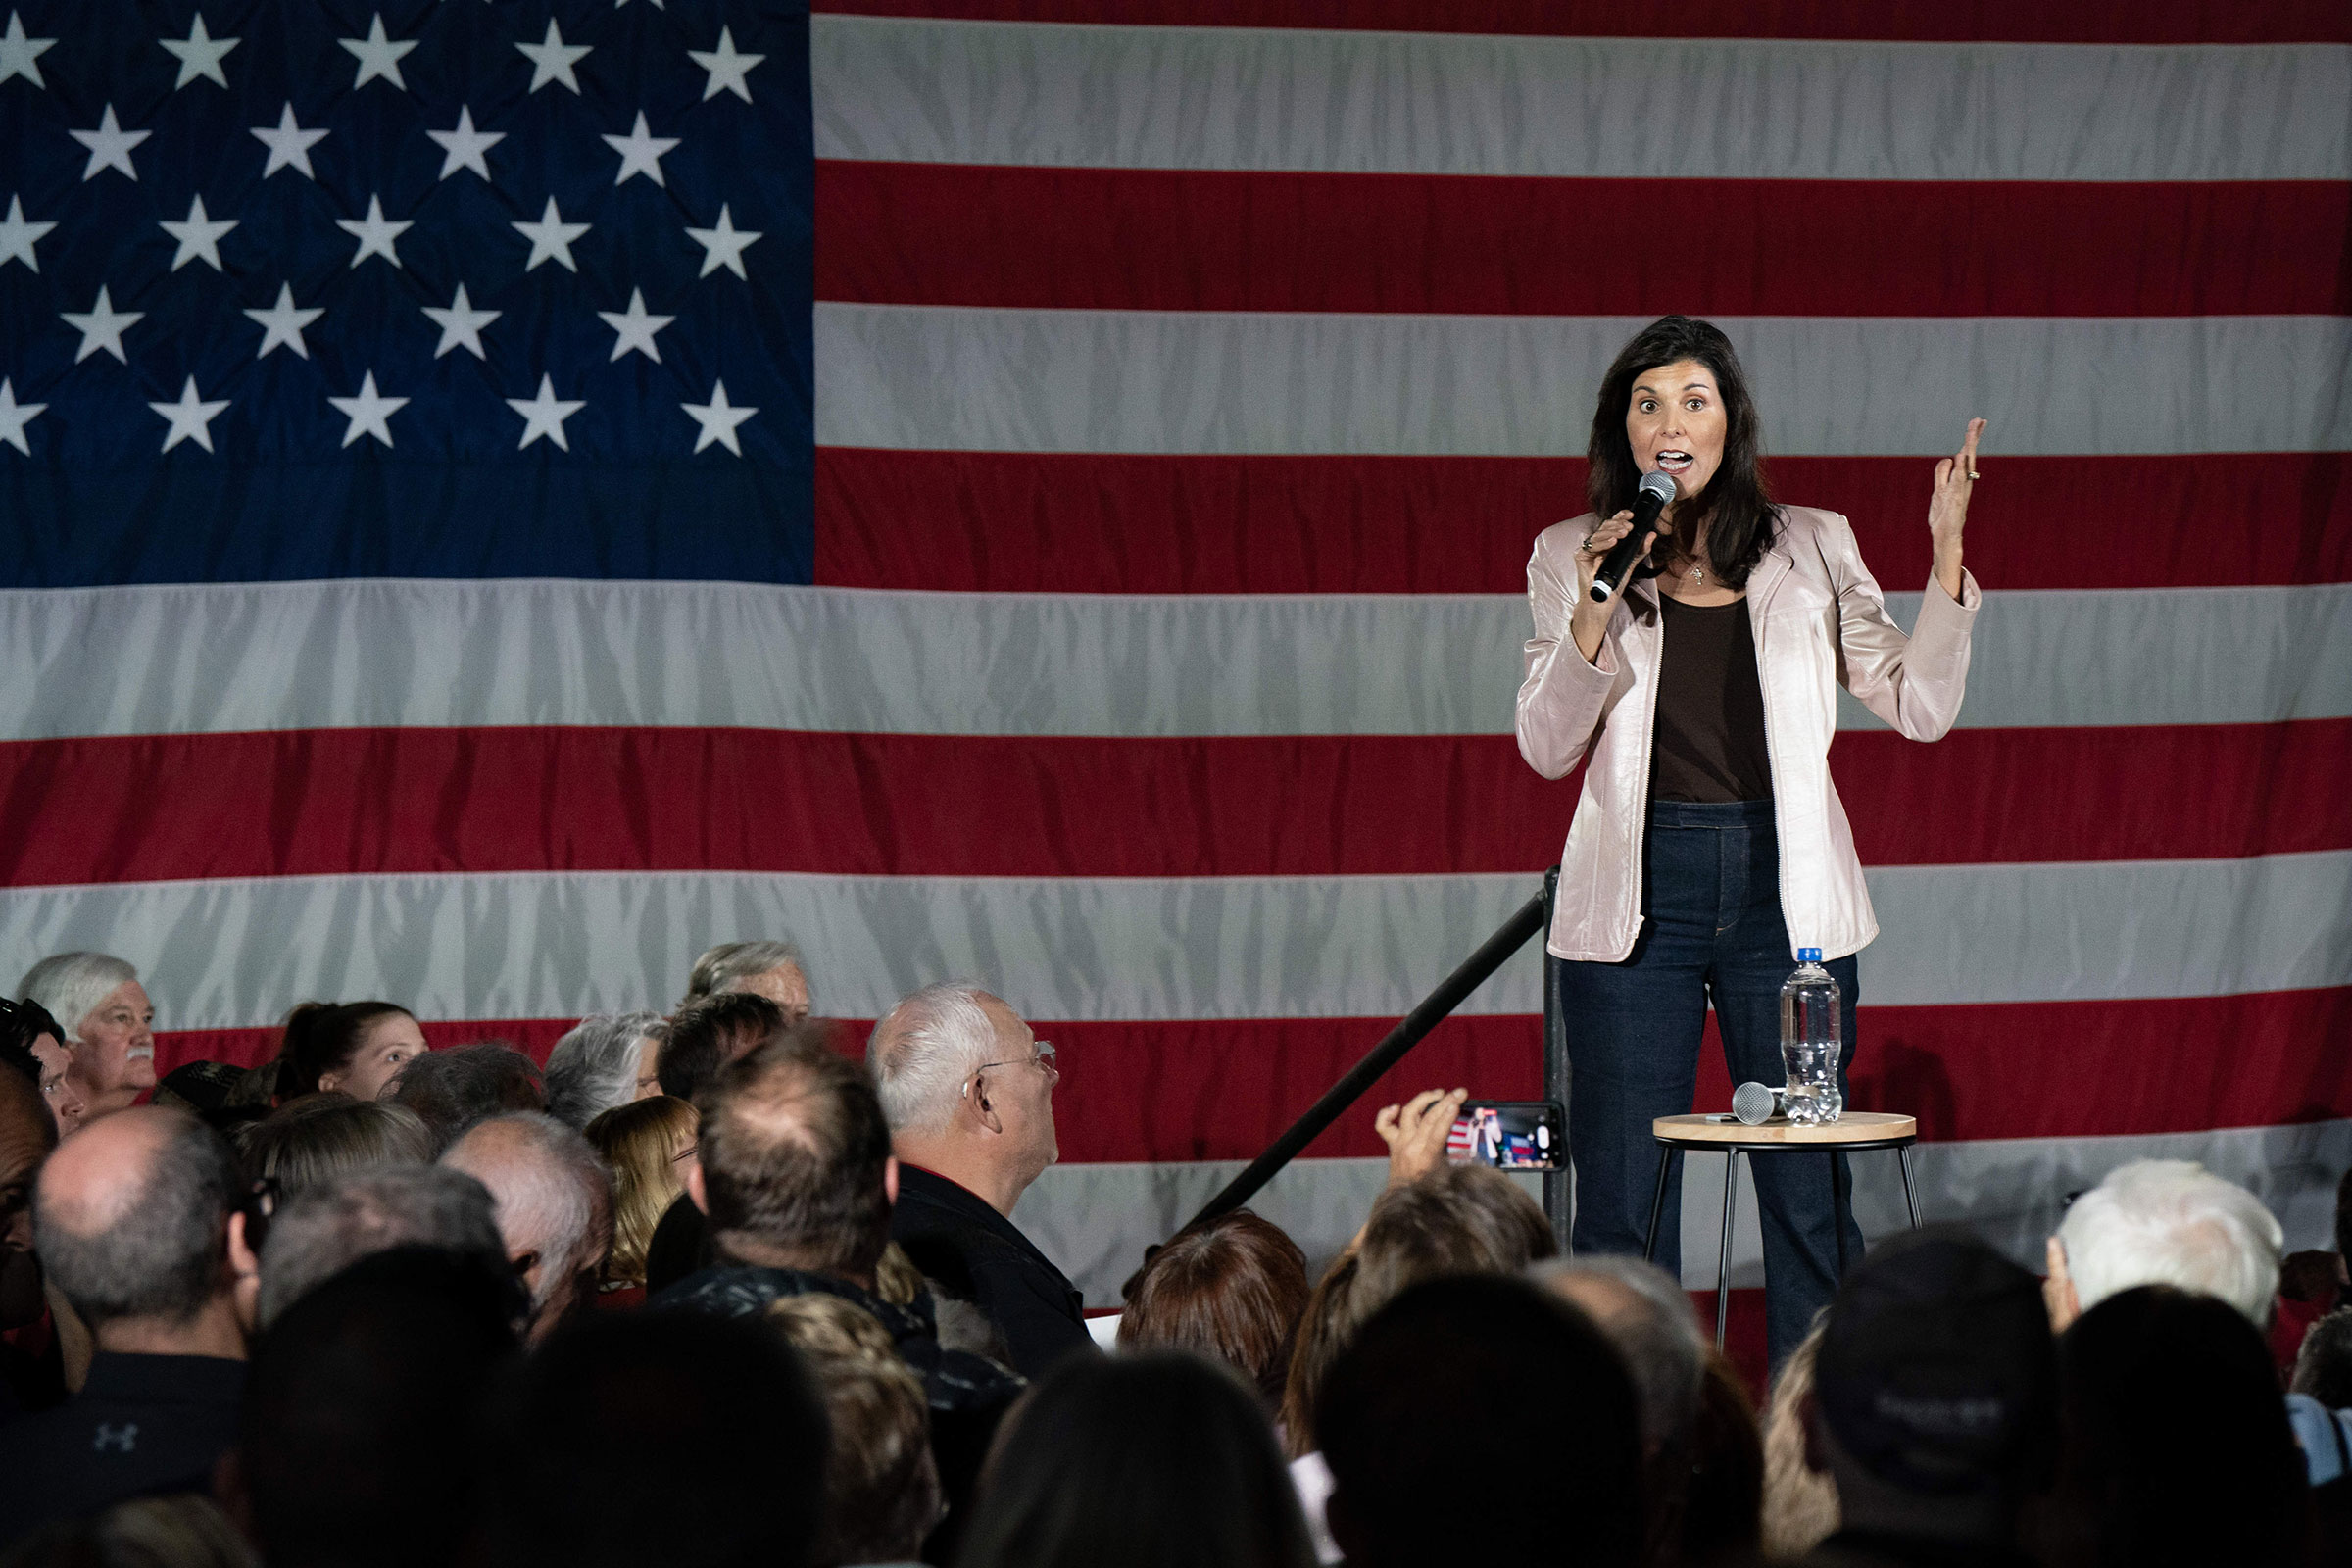 Nikki Haley speaks during a campaign event at Horry-Georgetown Technical College in S.C., on March 13, 2023. (Allison Joyce—Anadolu Agency/Getty Images)